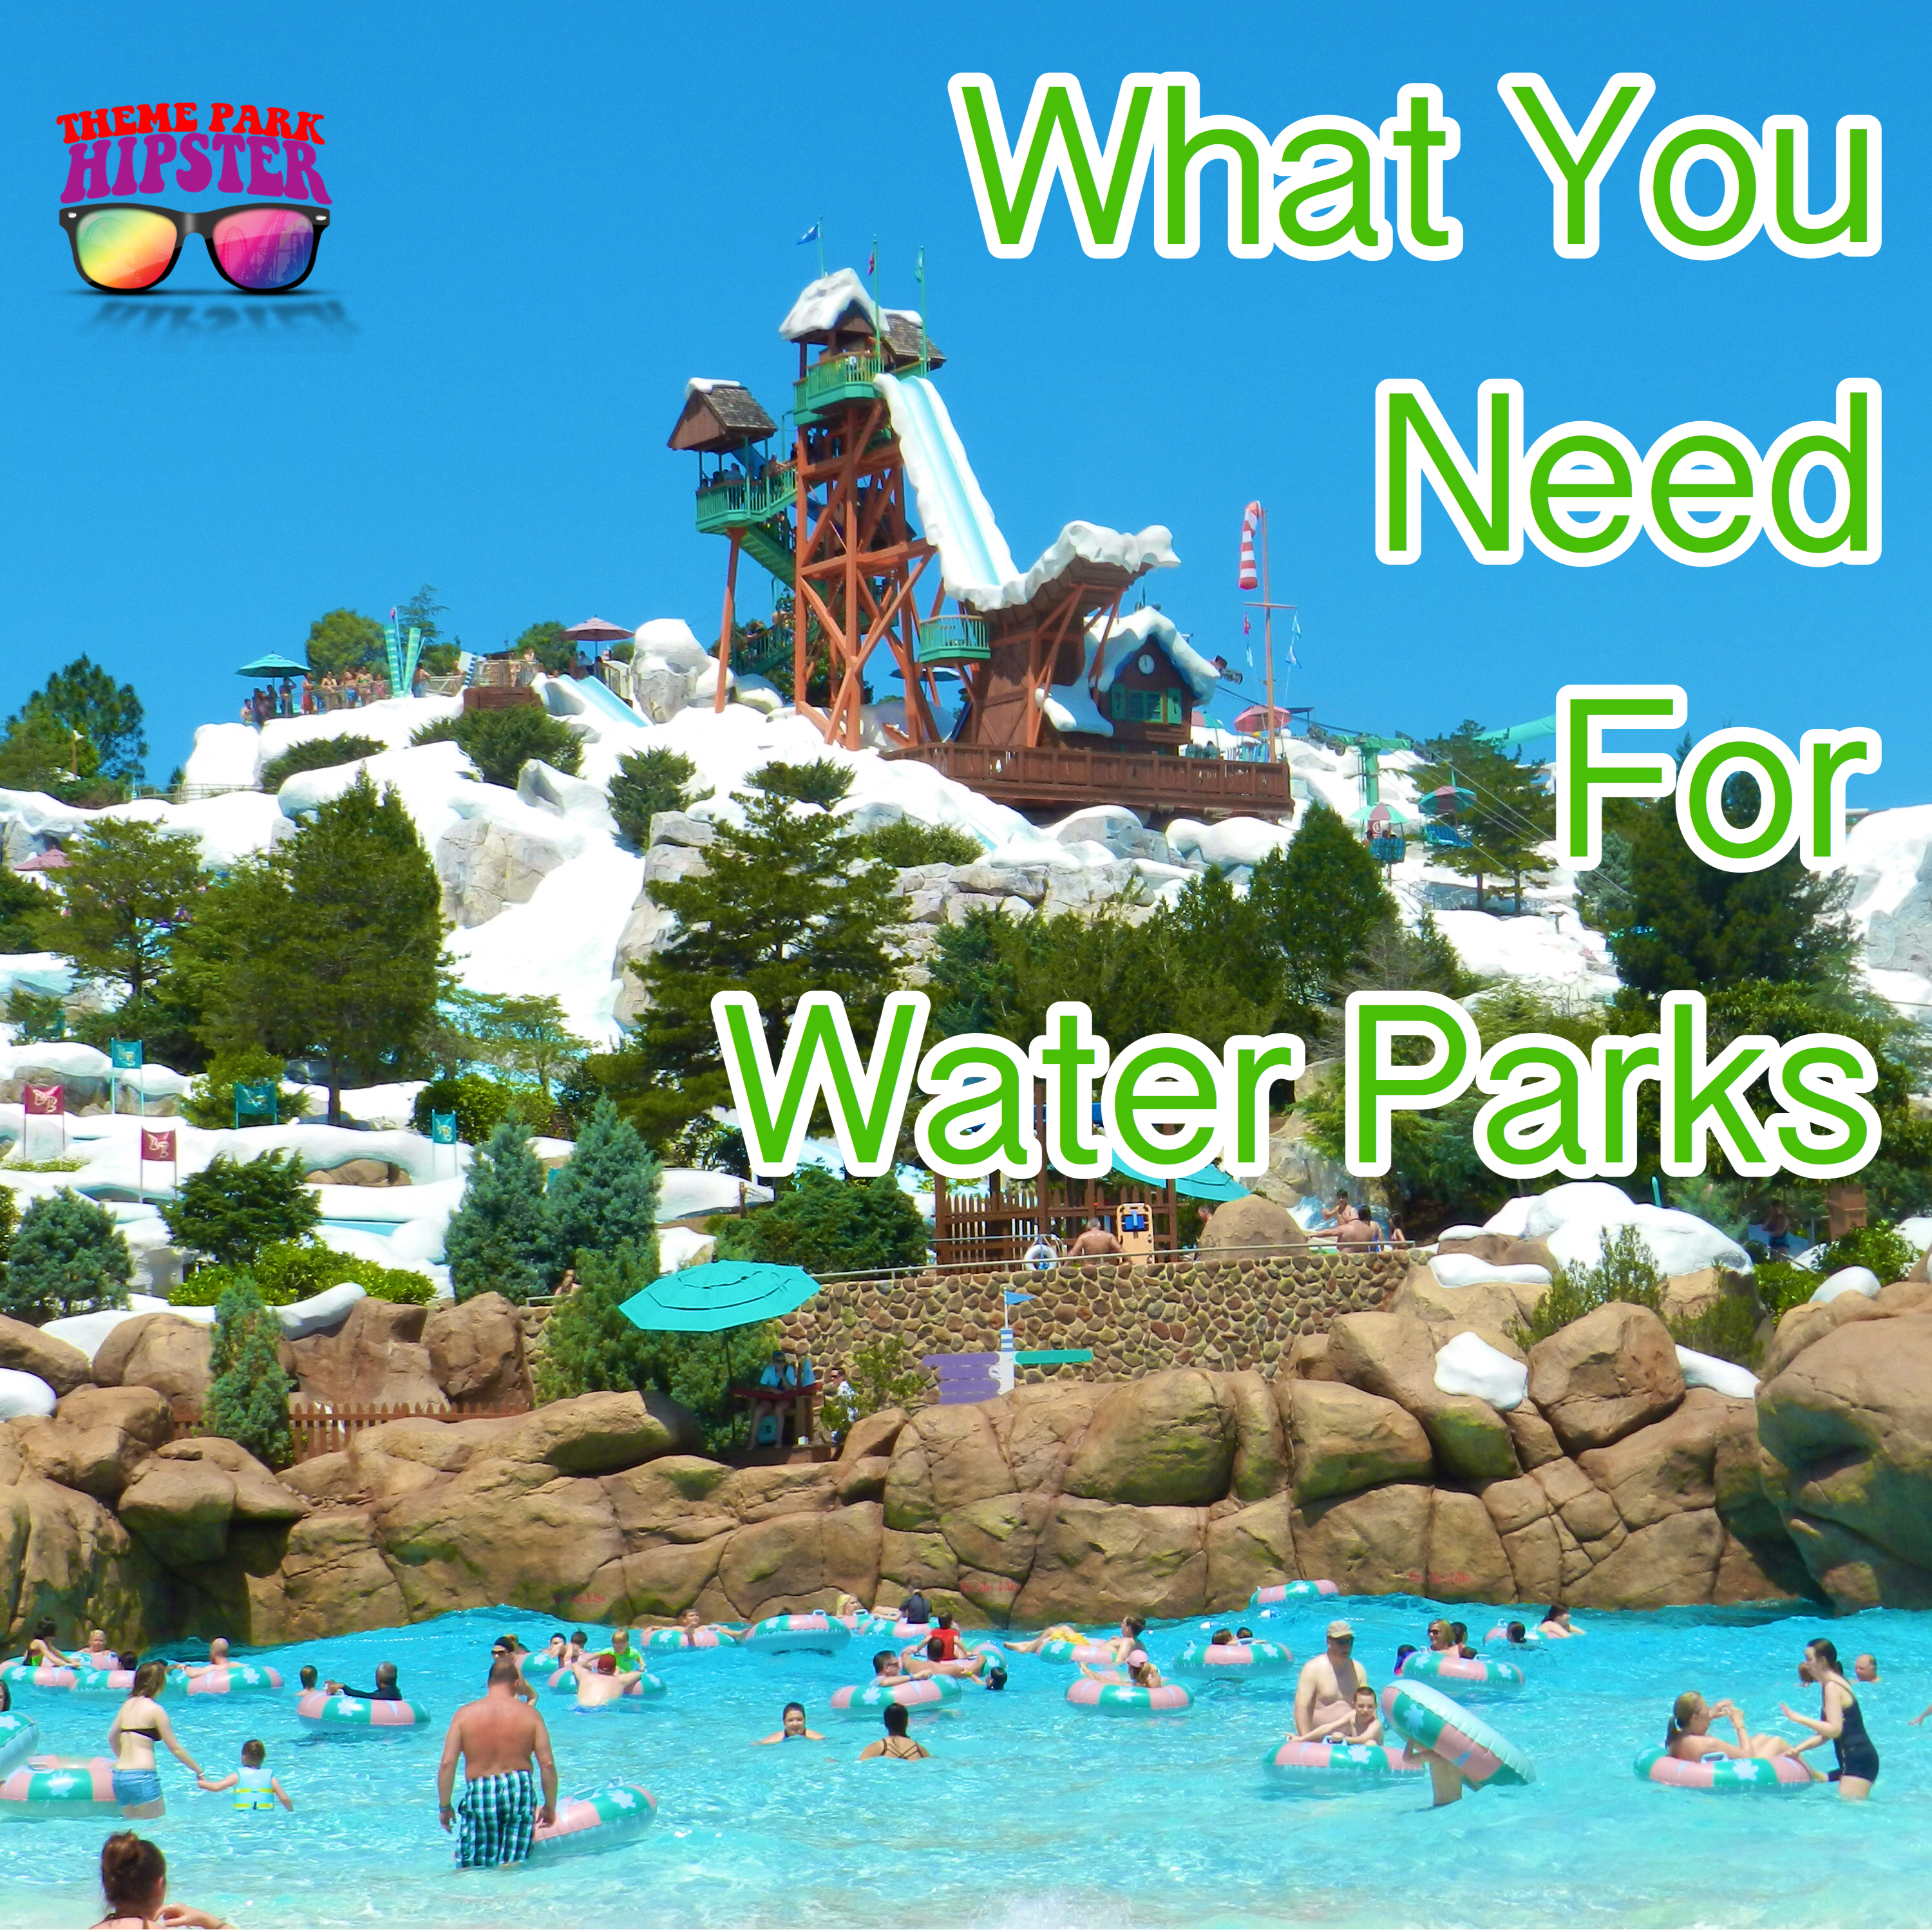 Water Park Theme Park Packing List